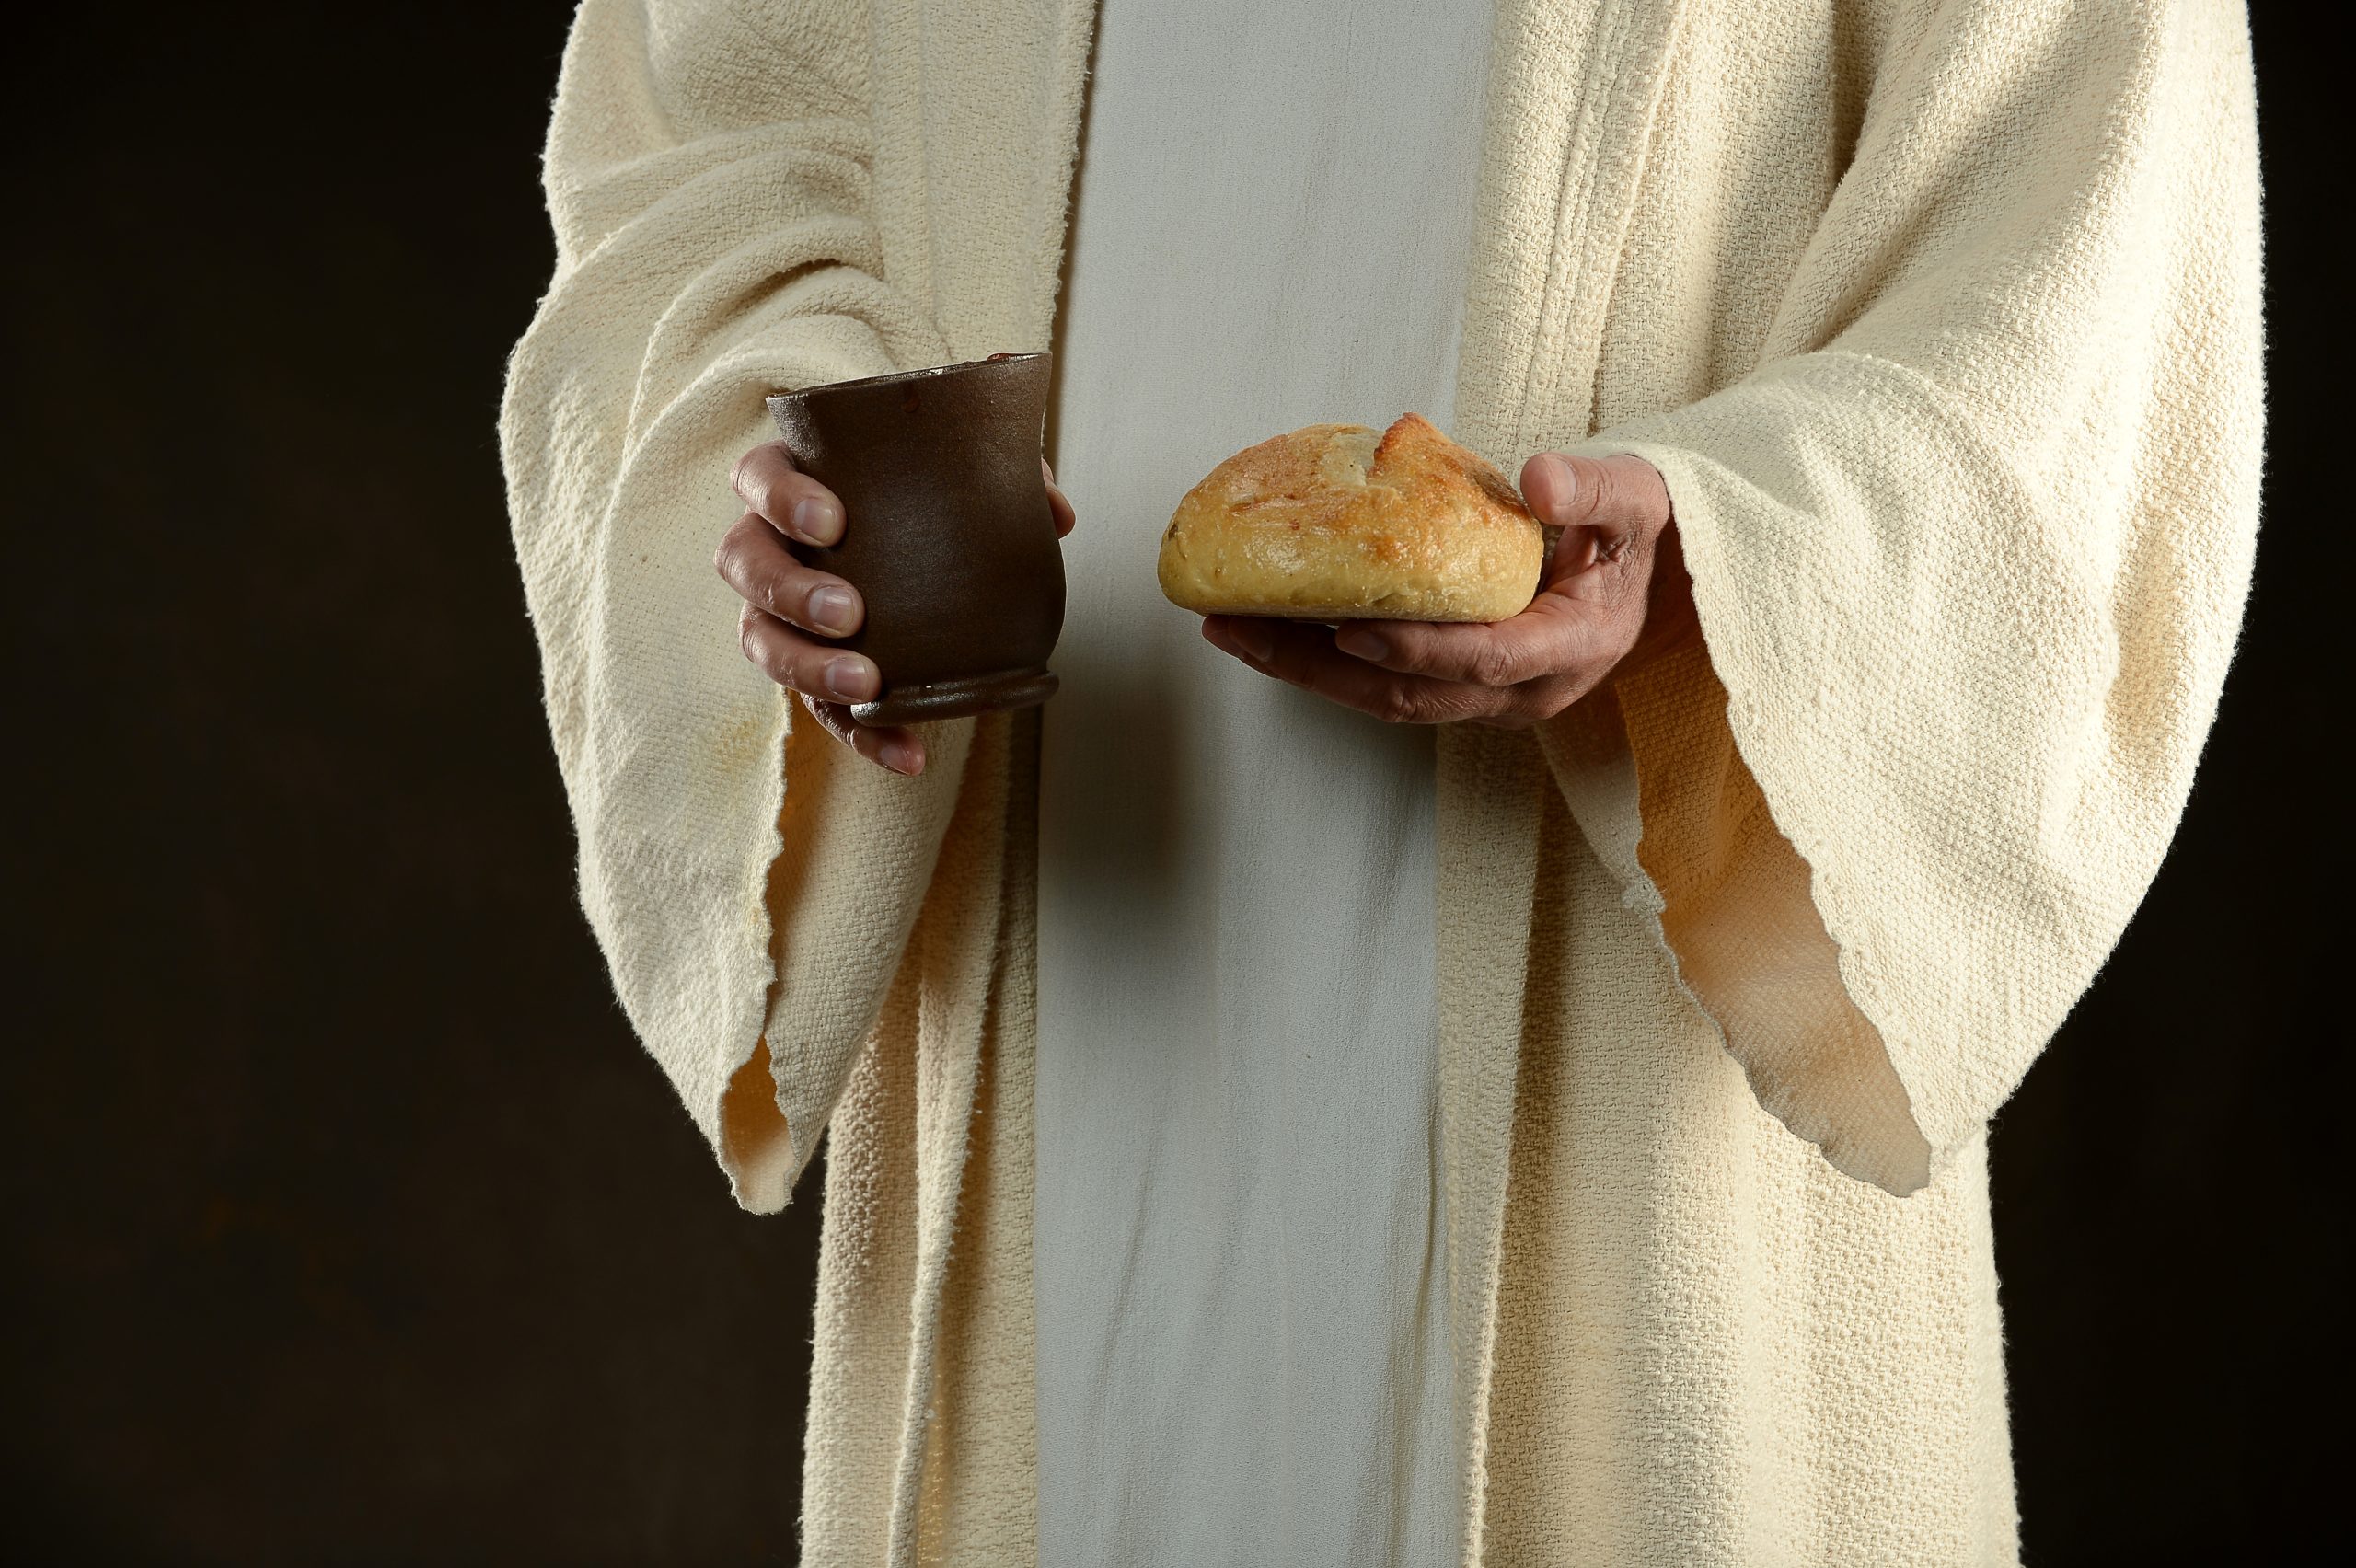 Jesus holding bread and a cup of wine as a methaphore